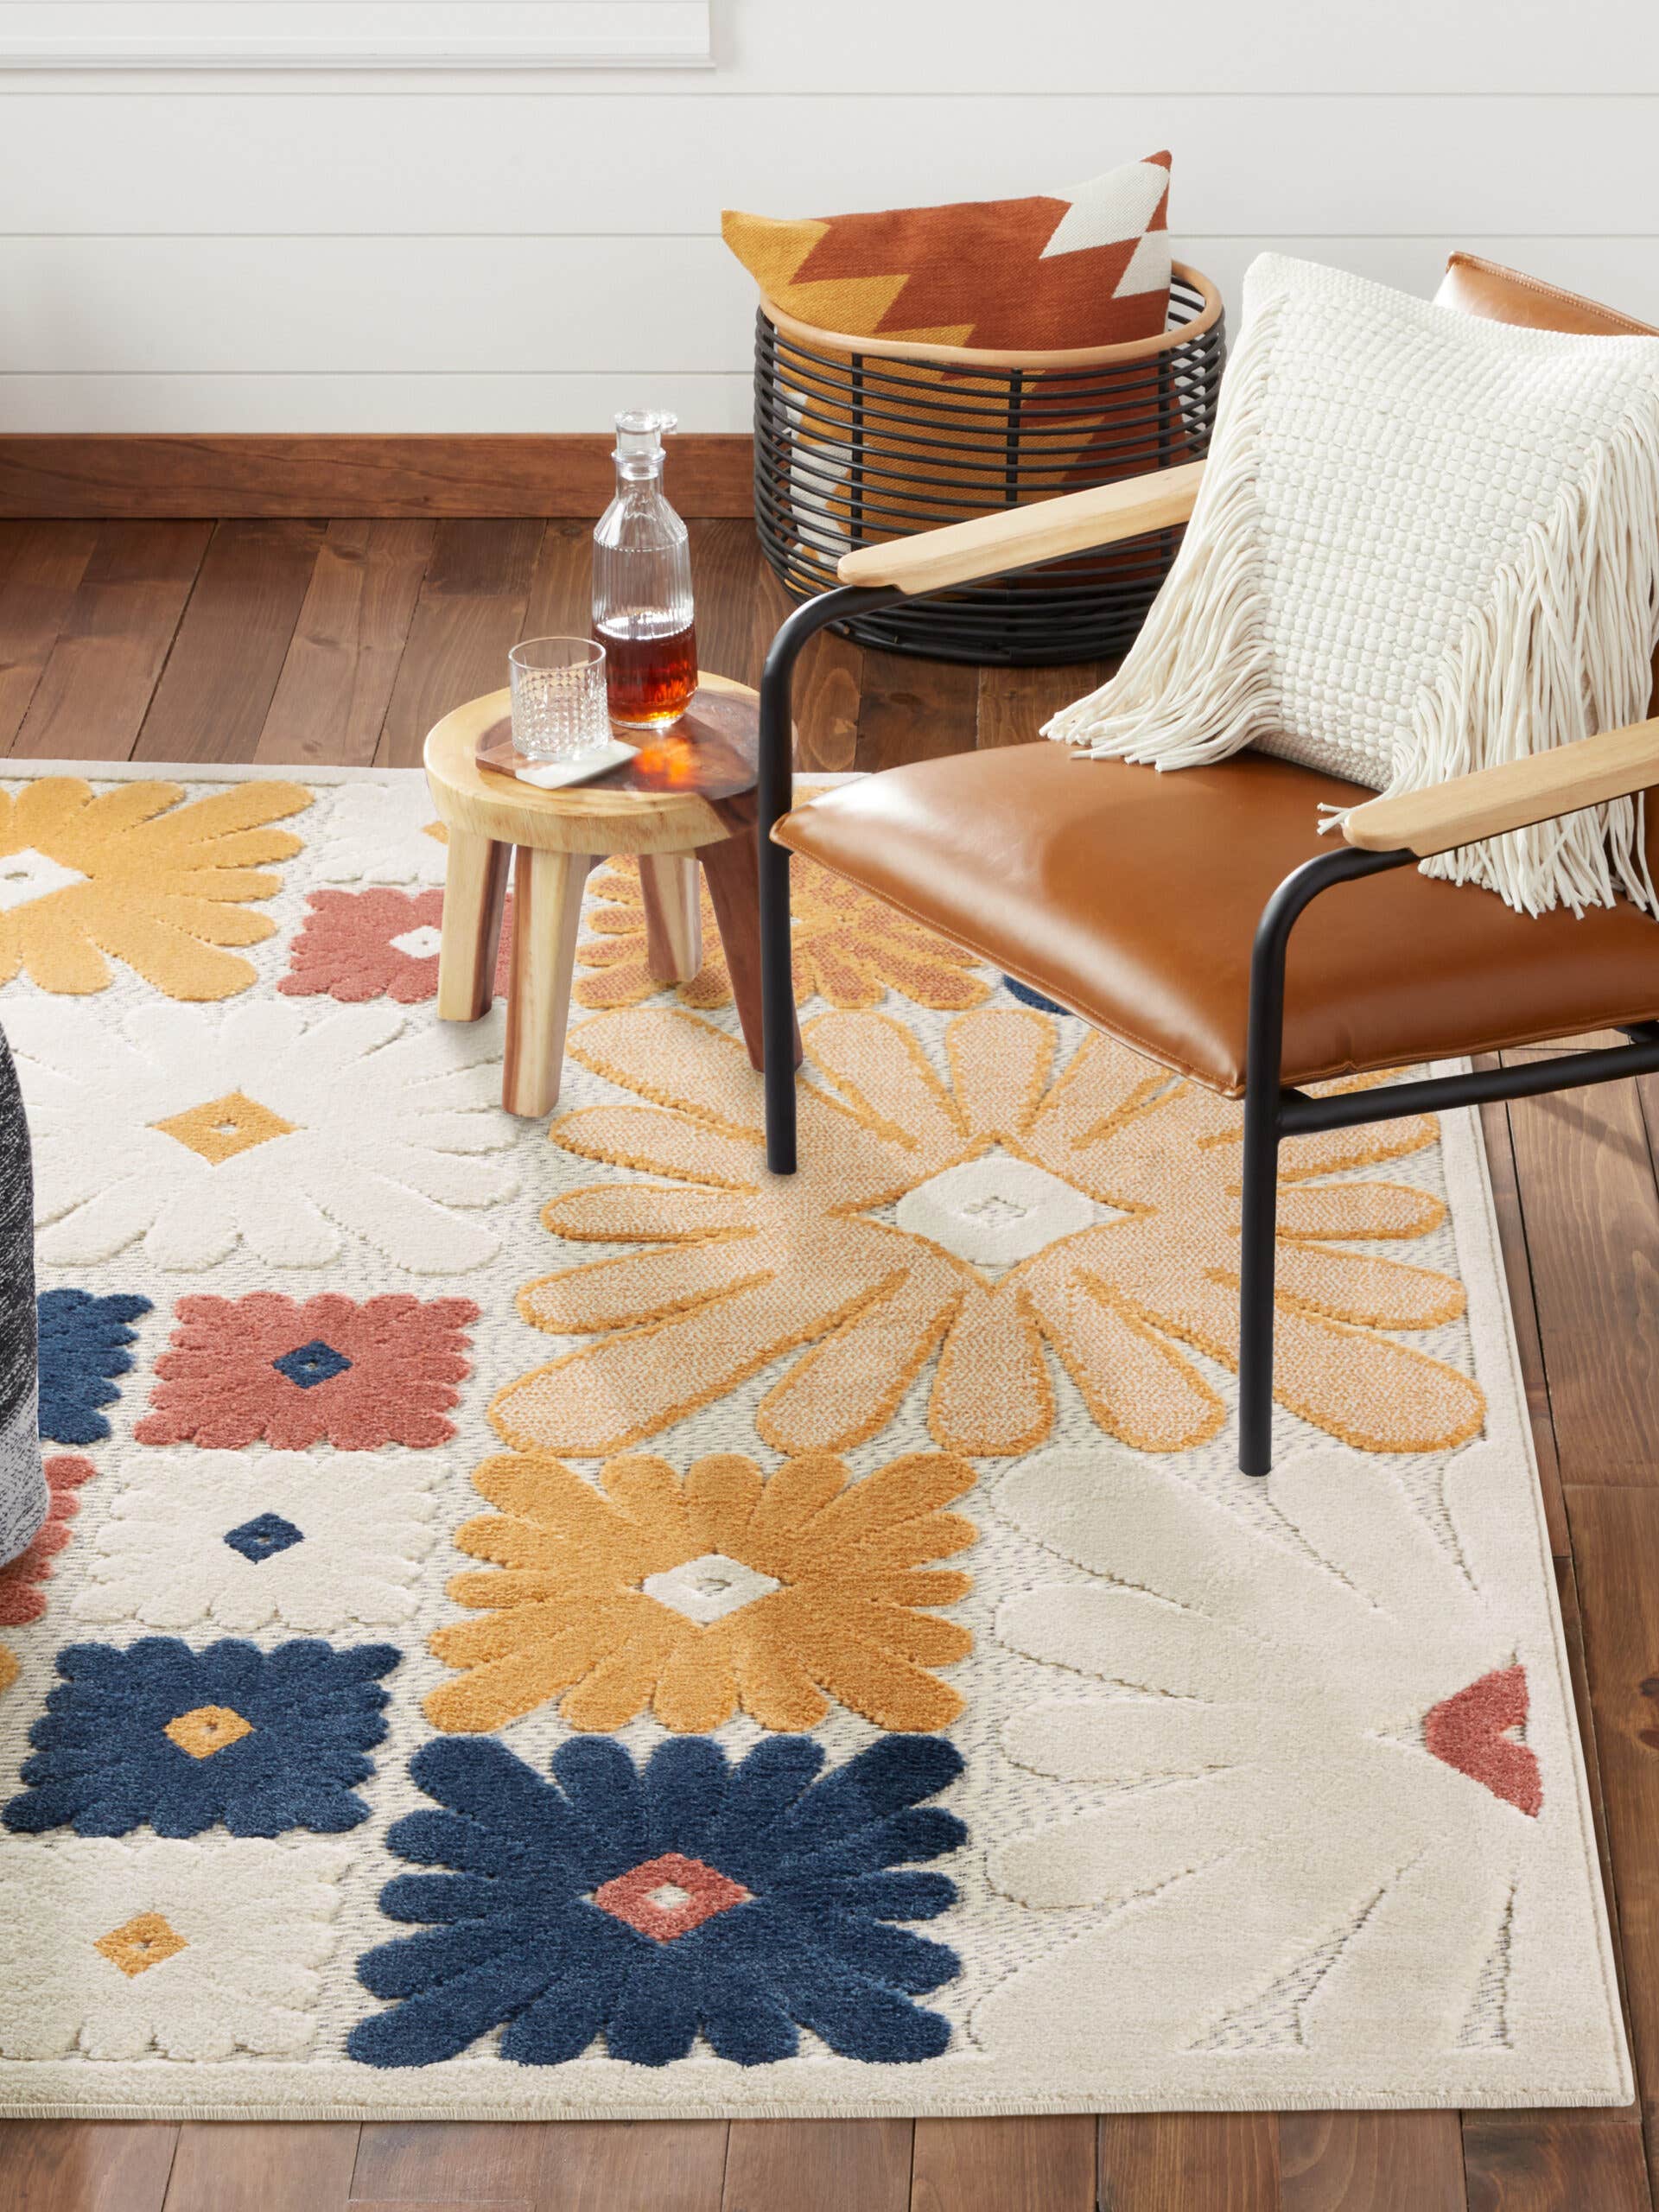 Miranda Lambert Just Dropped a Summer Rug That Takes Her to Her Happy Place